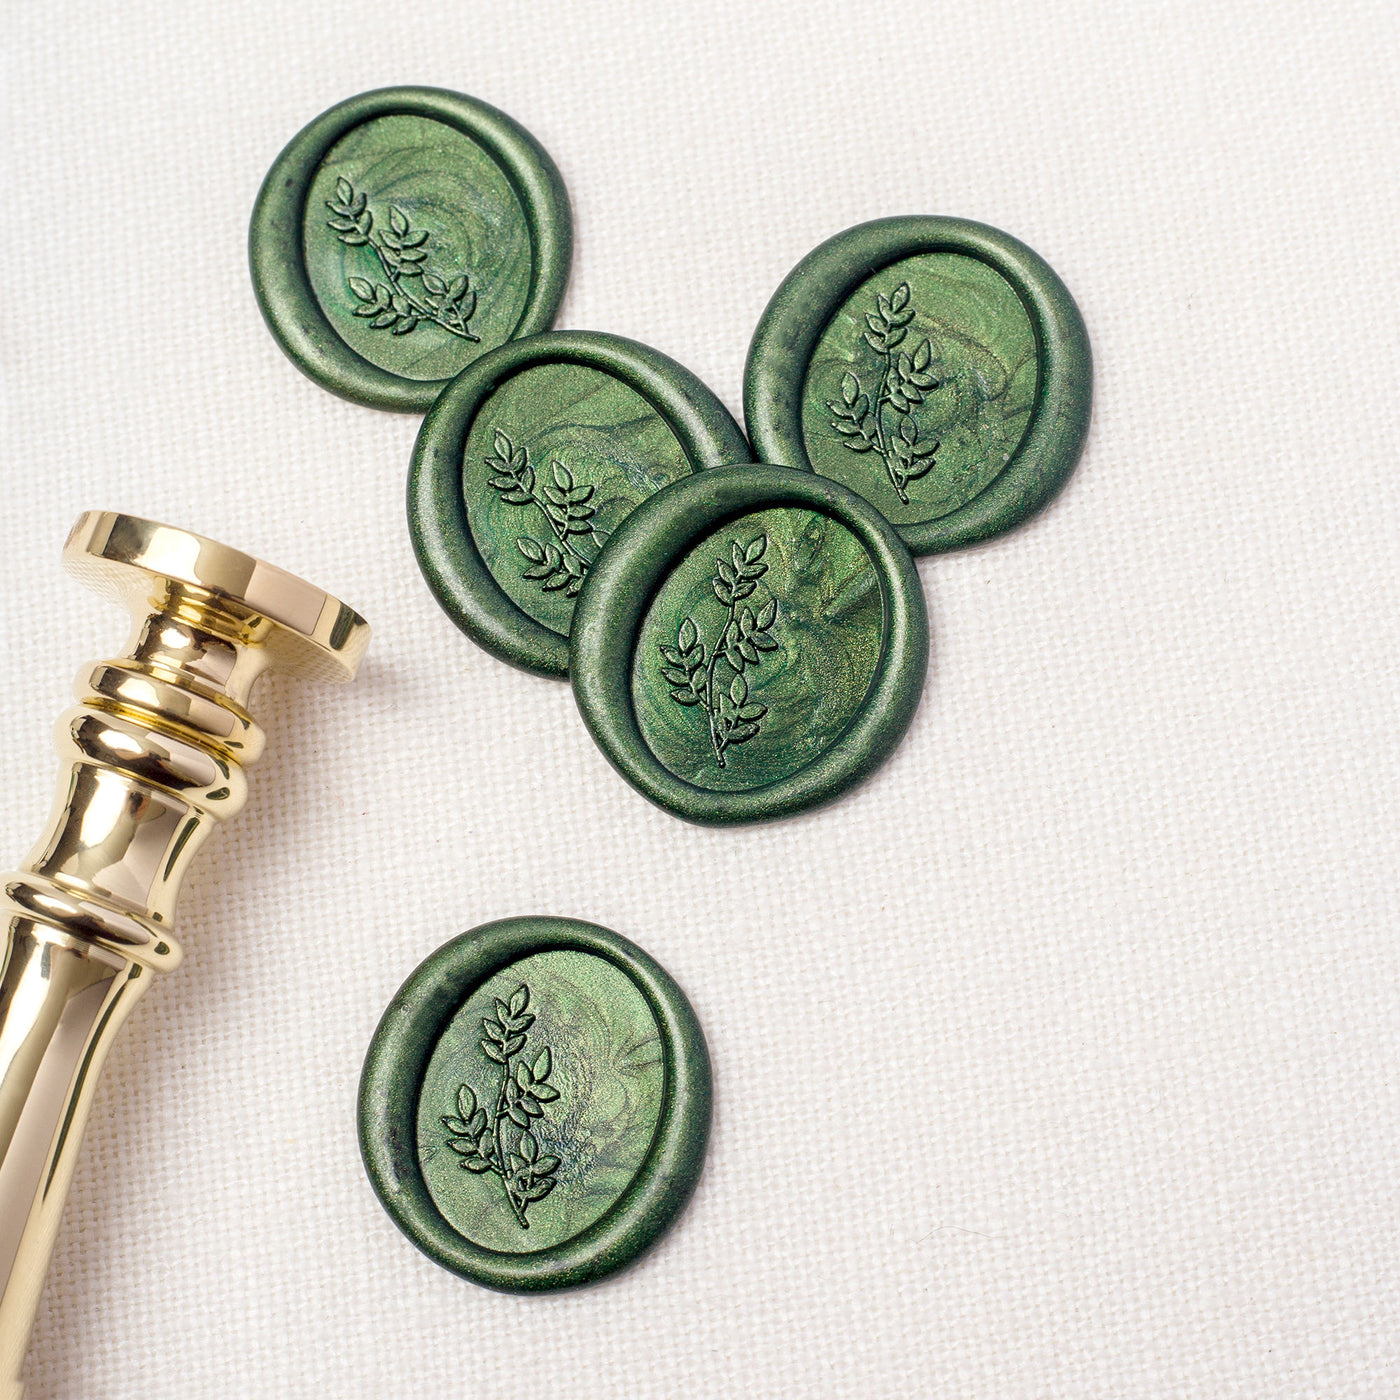 BOTANICAL EMBELLISHMENT OVAL WAX SEAL STAMP - BEATRICE